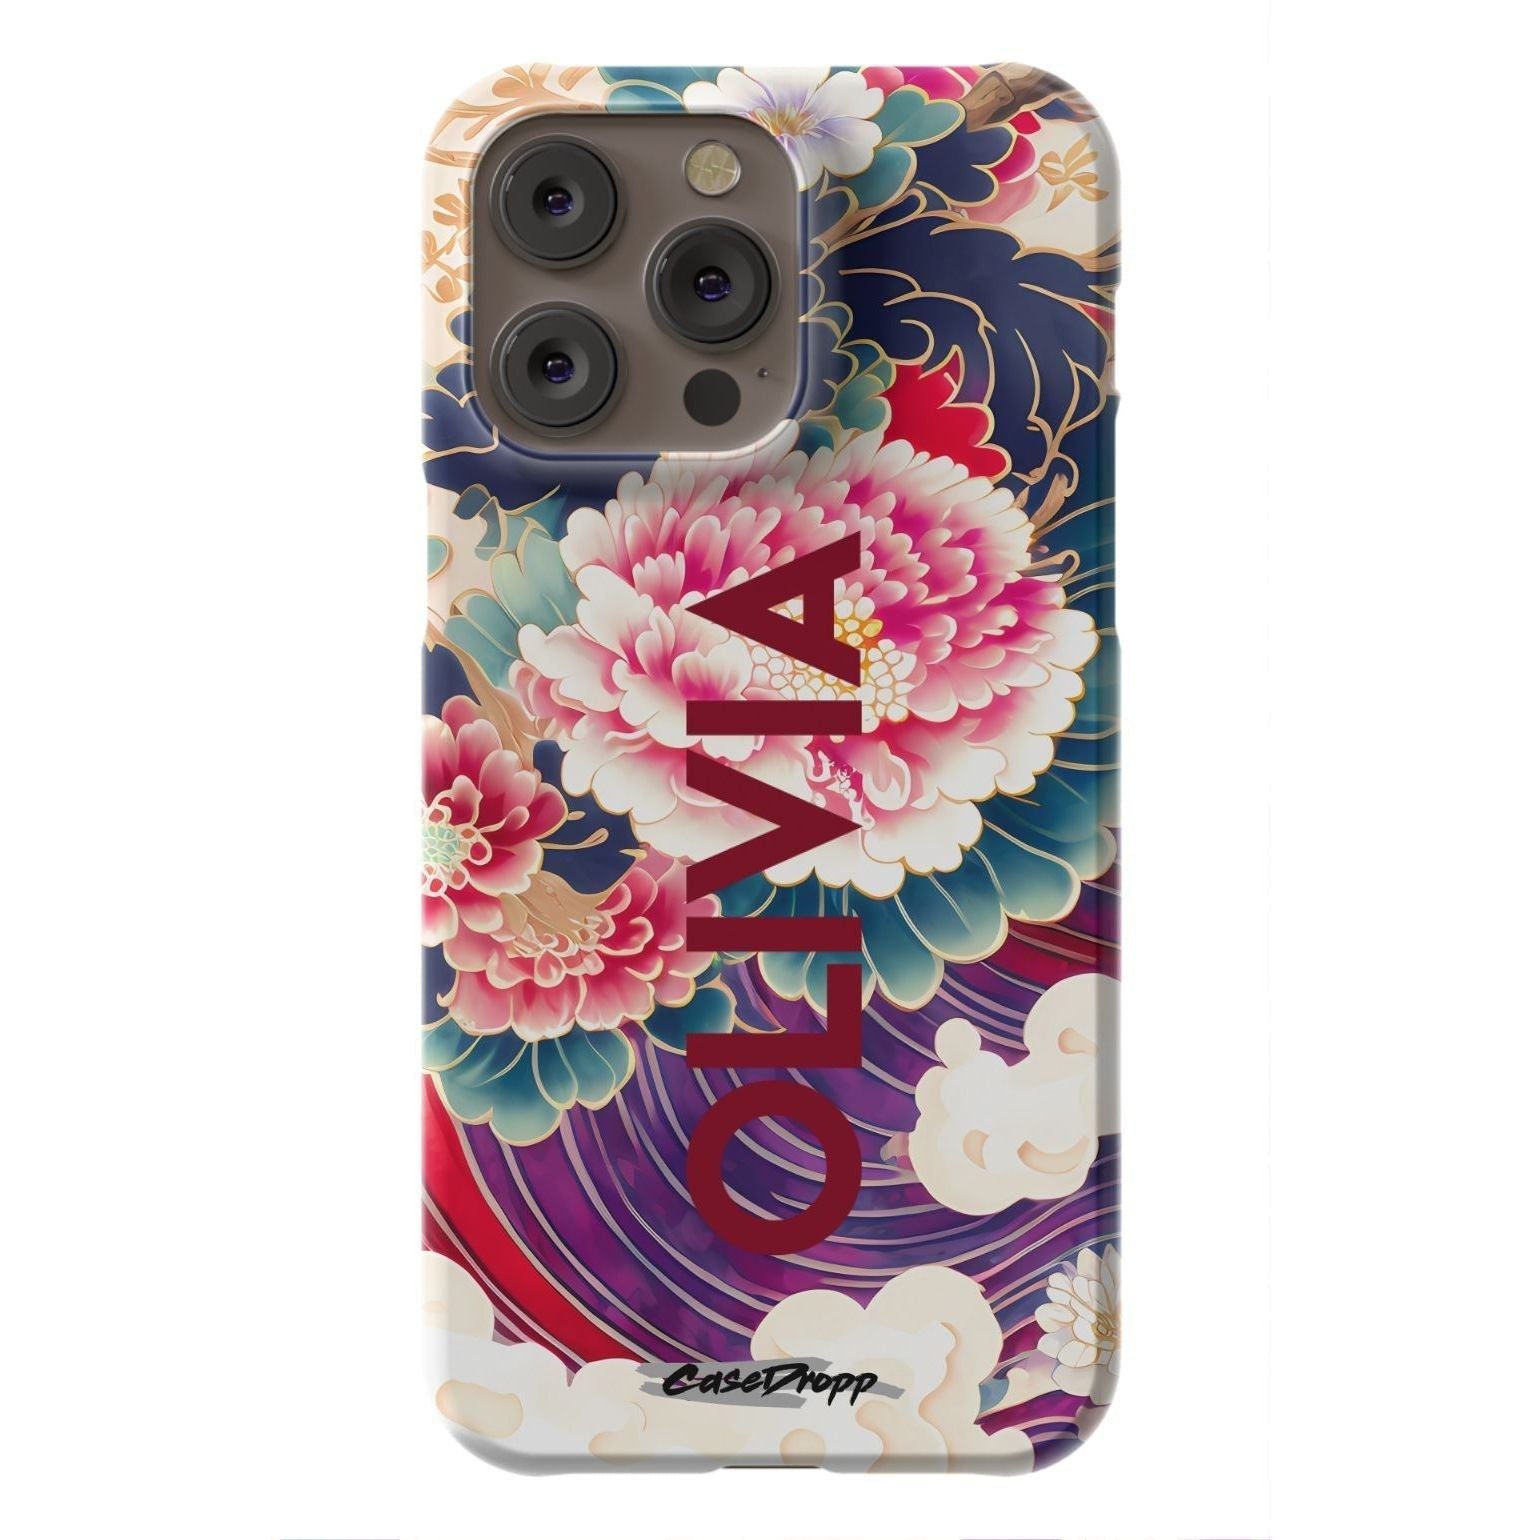 Drifting in Dreams - Custom Personalized - iPhone Case CaseDropp